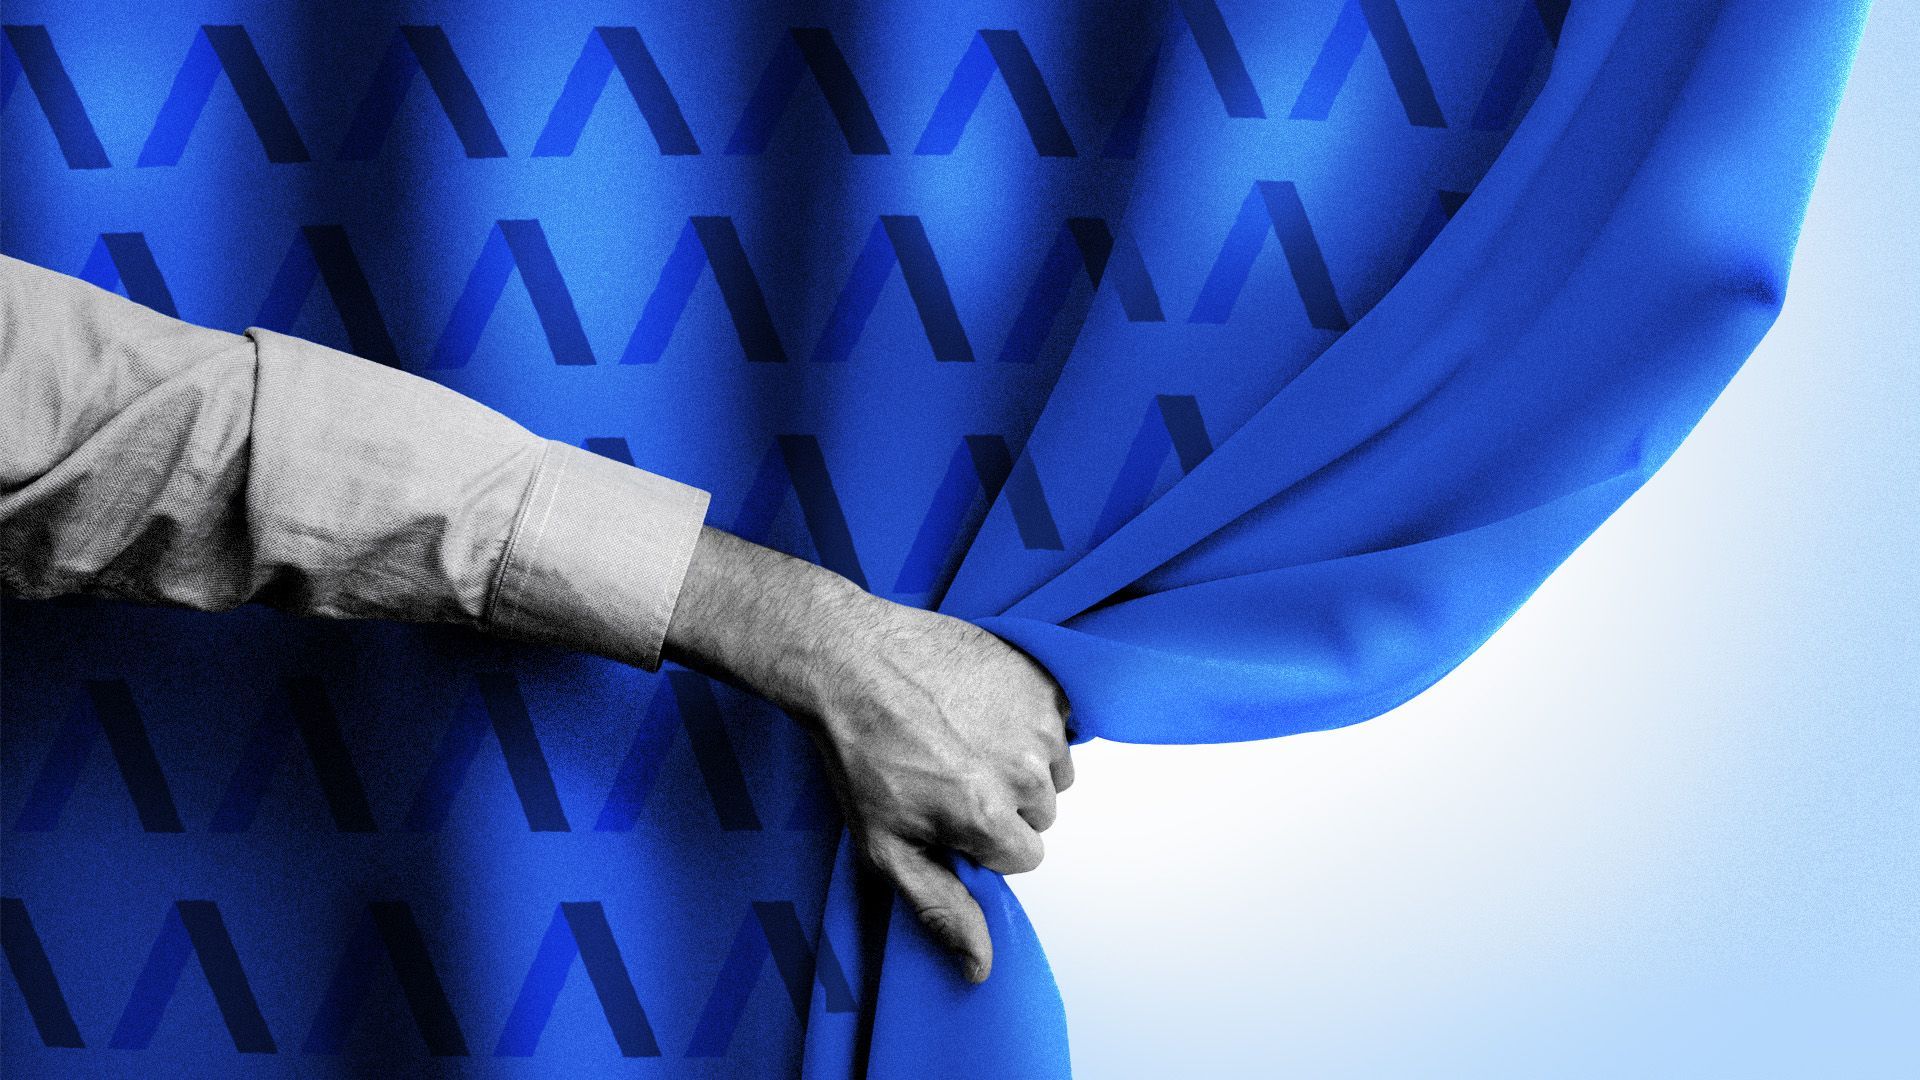 Illustration of a hand pulling back a blue curtain with a recurring Axios logo across it